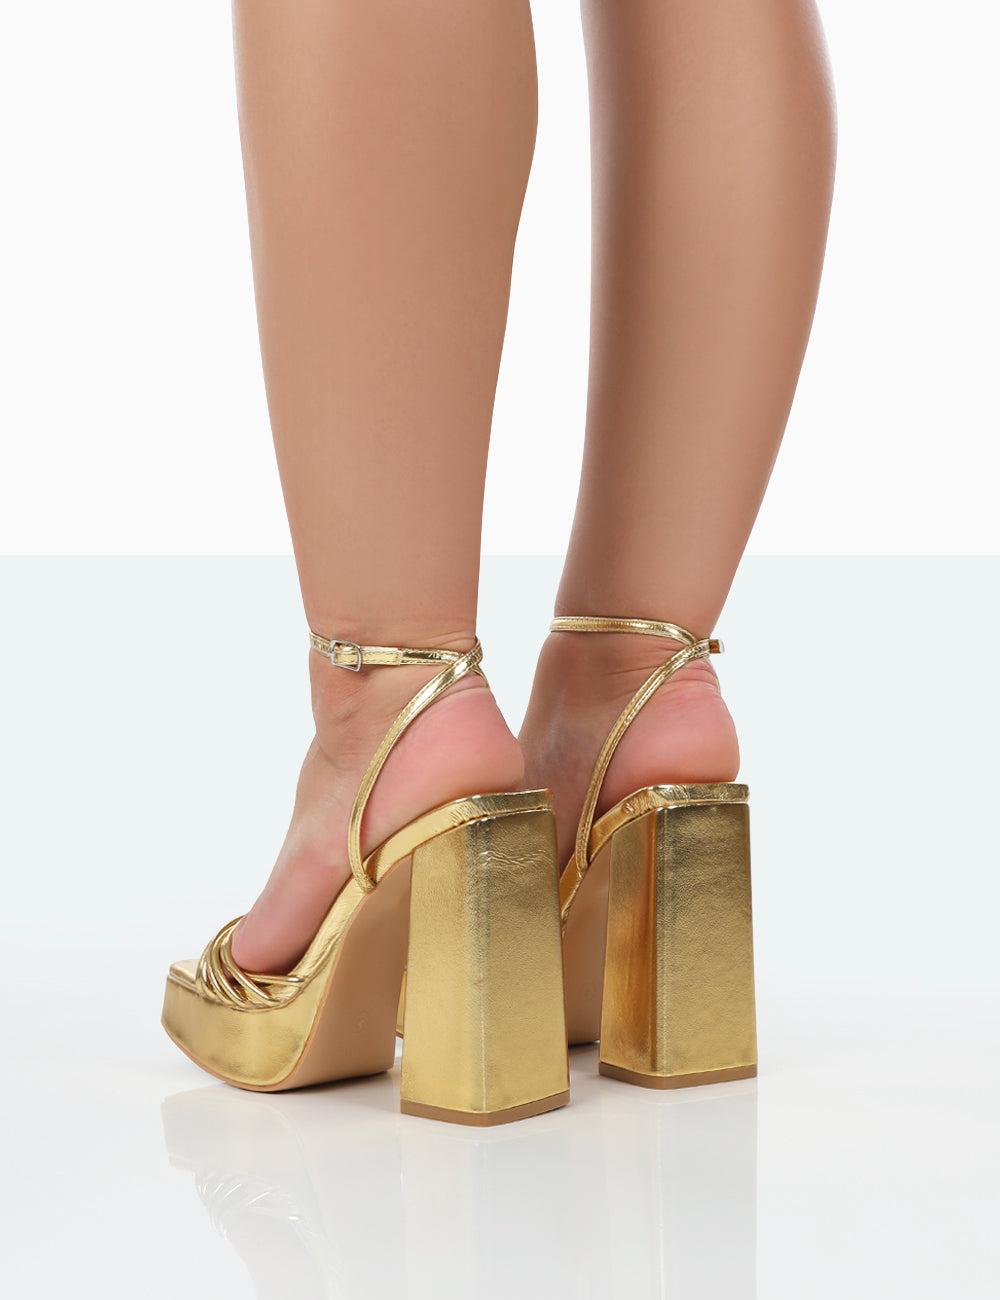 Gold Metallic Ankle Chain Prom Shoes Strappy High Heel Sandals|FSJshoes